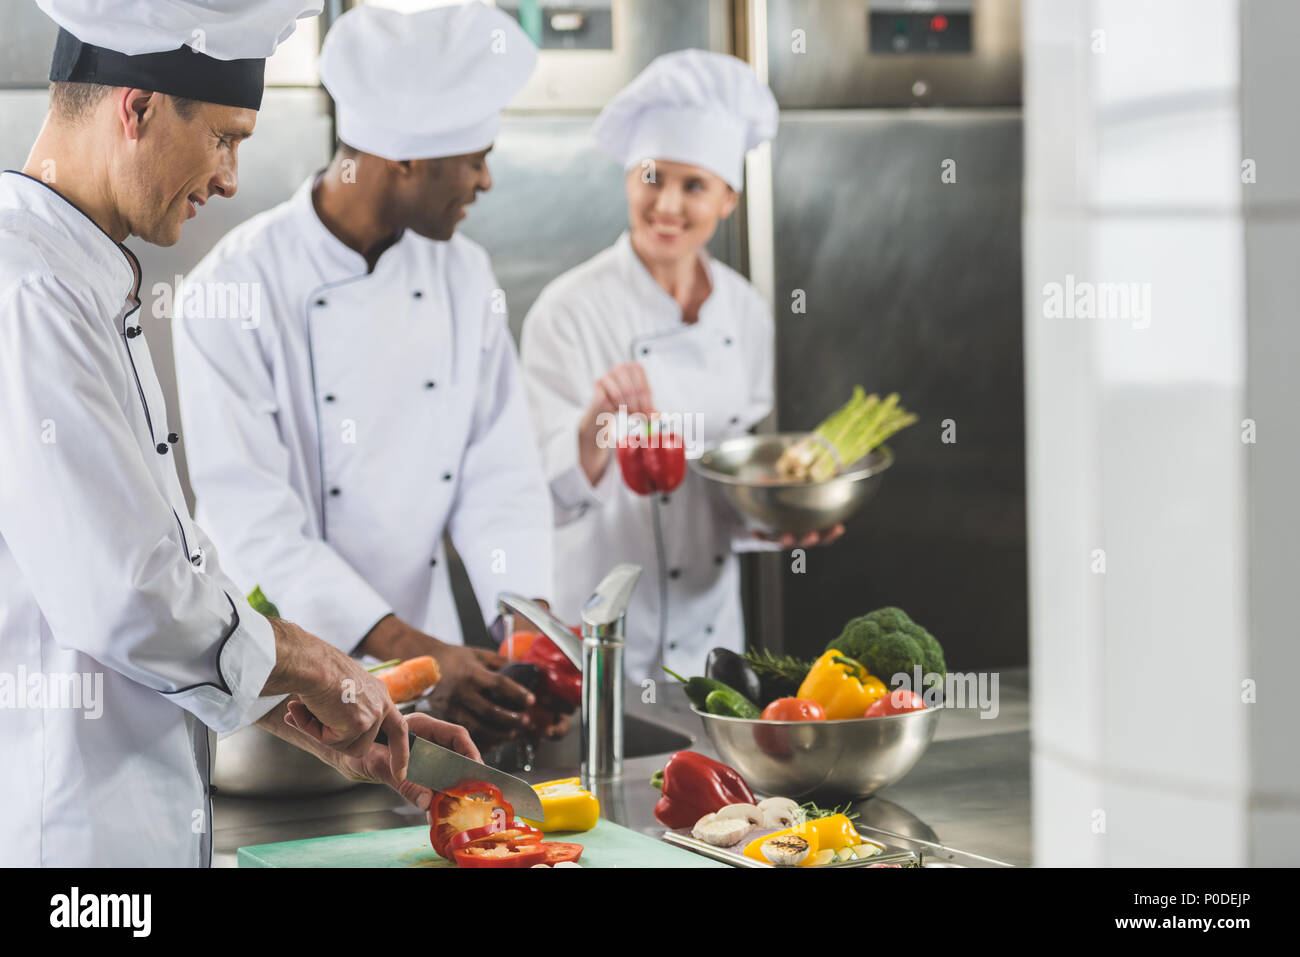 smiling multicultural chefs preparing food at restaurant kitchen Stock Photo